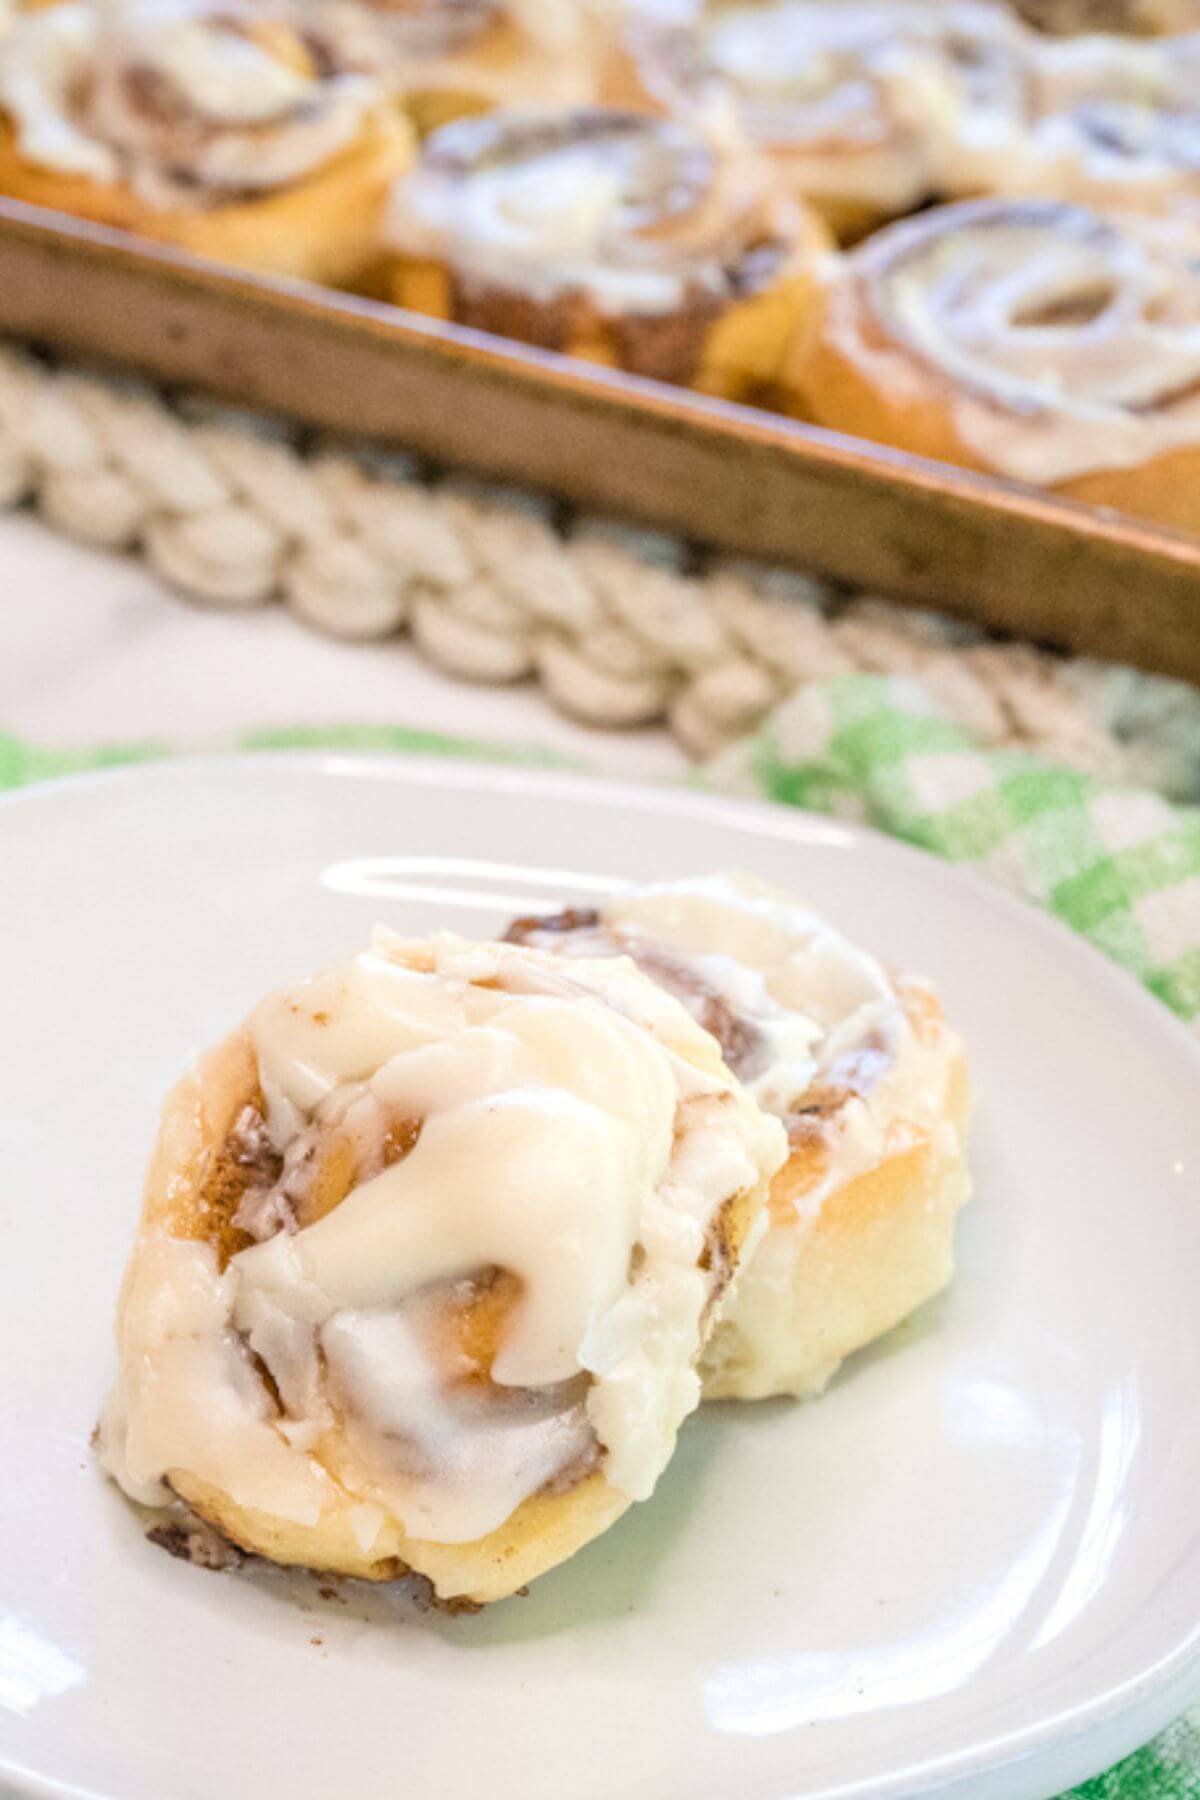 Two cinnamon buns sit overlapping each other on a white saucer near the full pan.